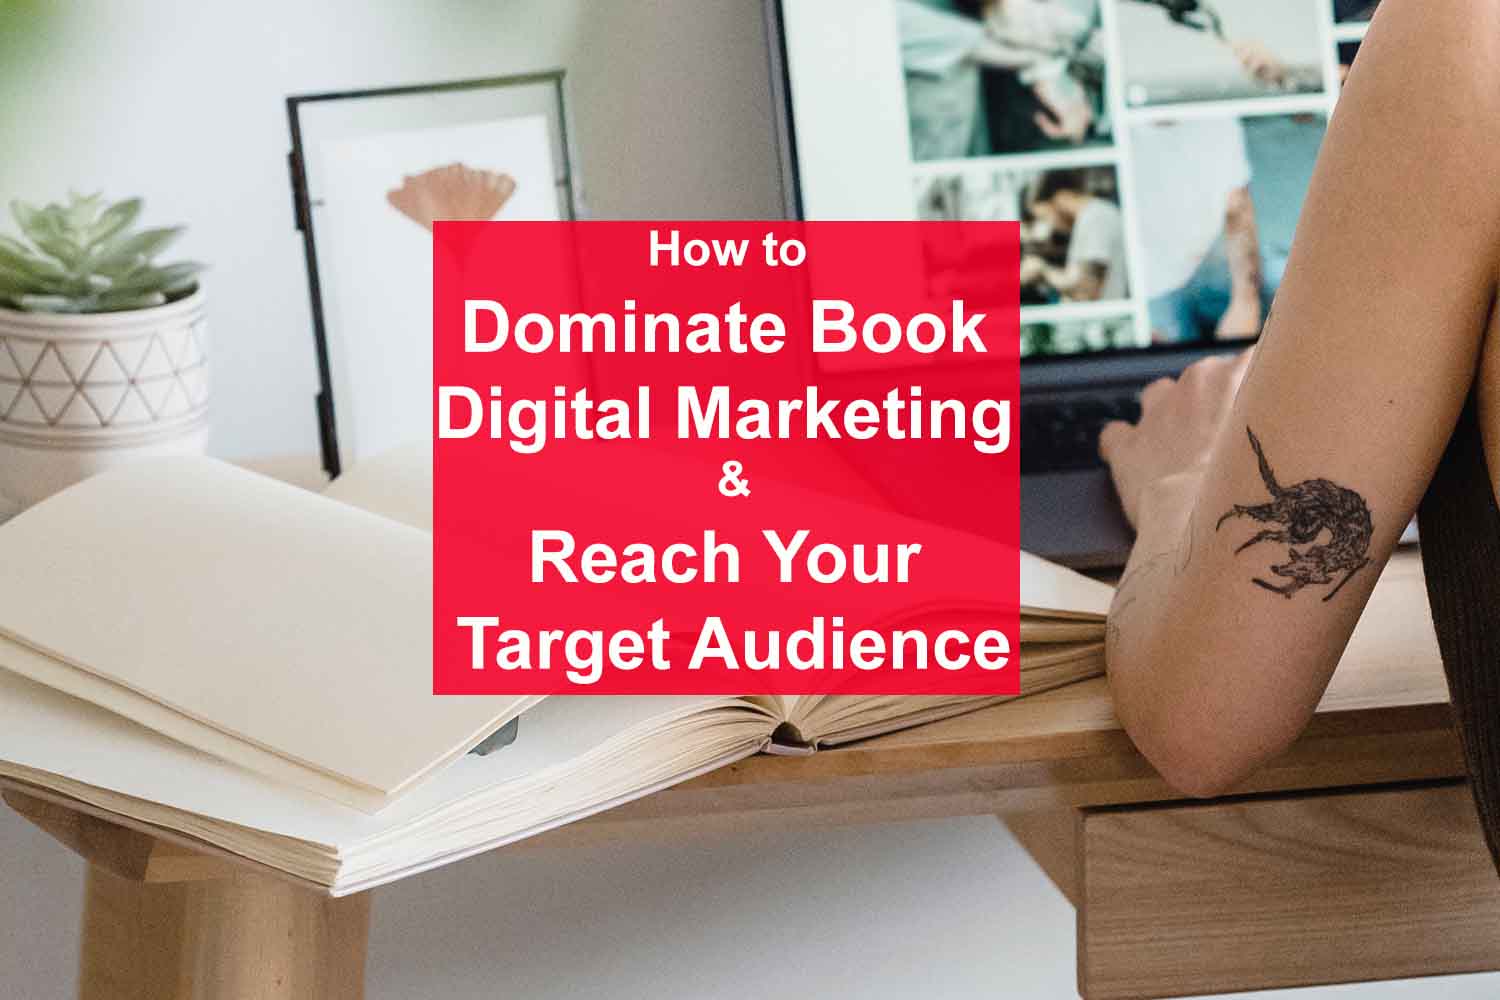 How to Dominate Book Digital Marketing and Reach Your Target Audience